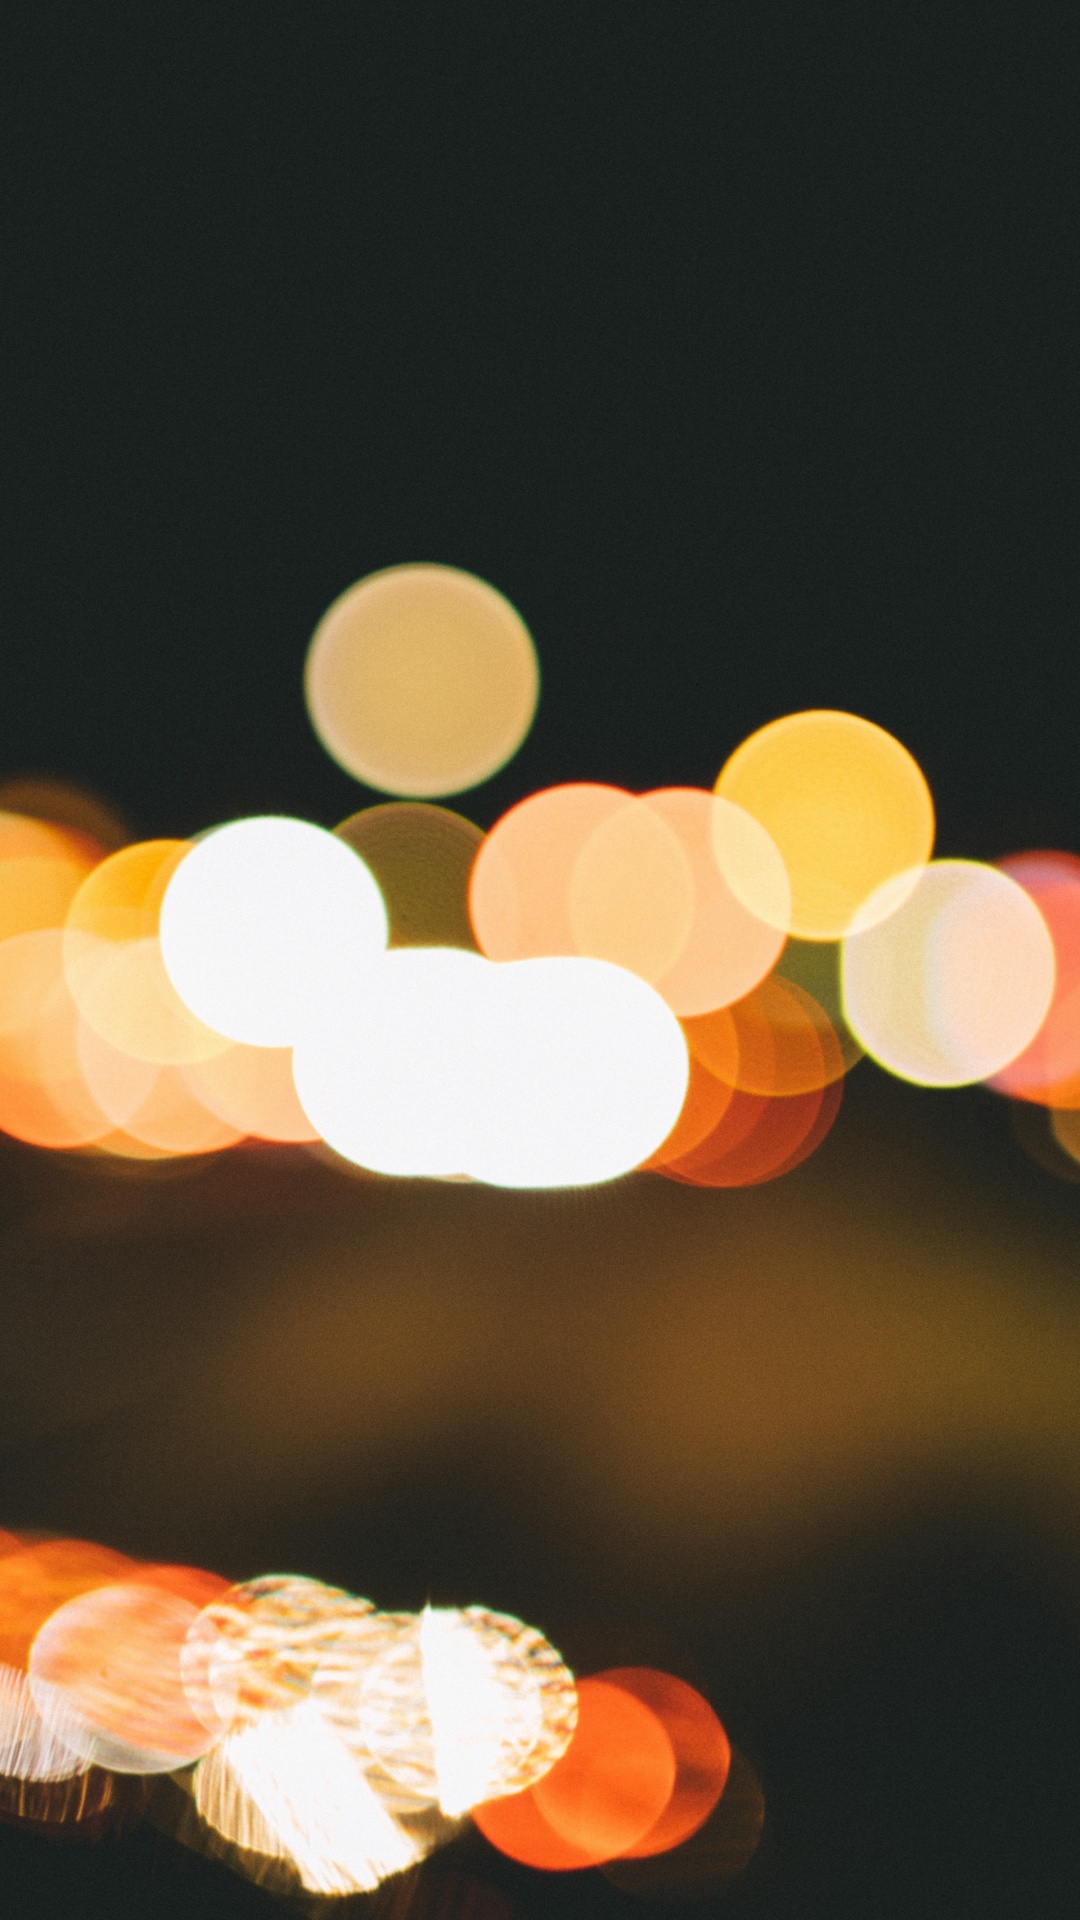 Bokeh Photography of Yellow Lights. Wallpaper in 1080x1920 Resolution